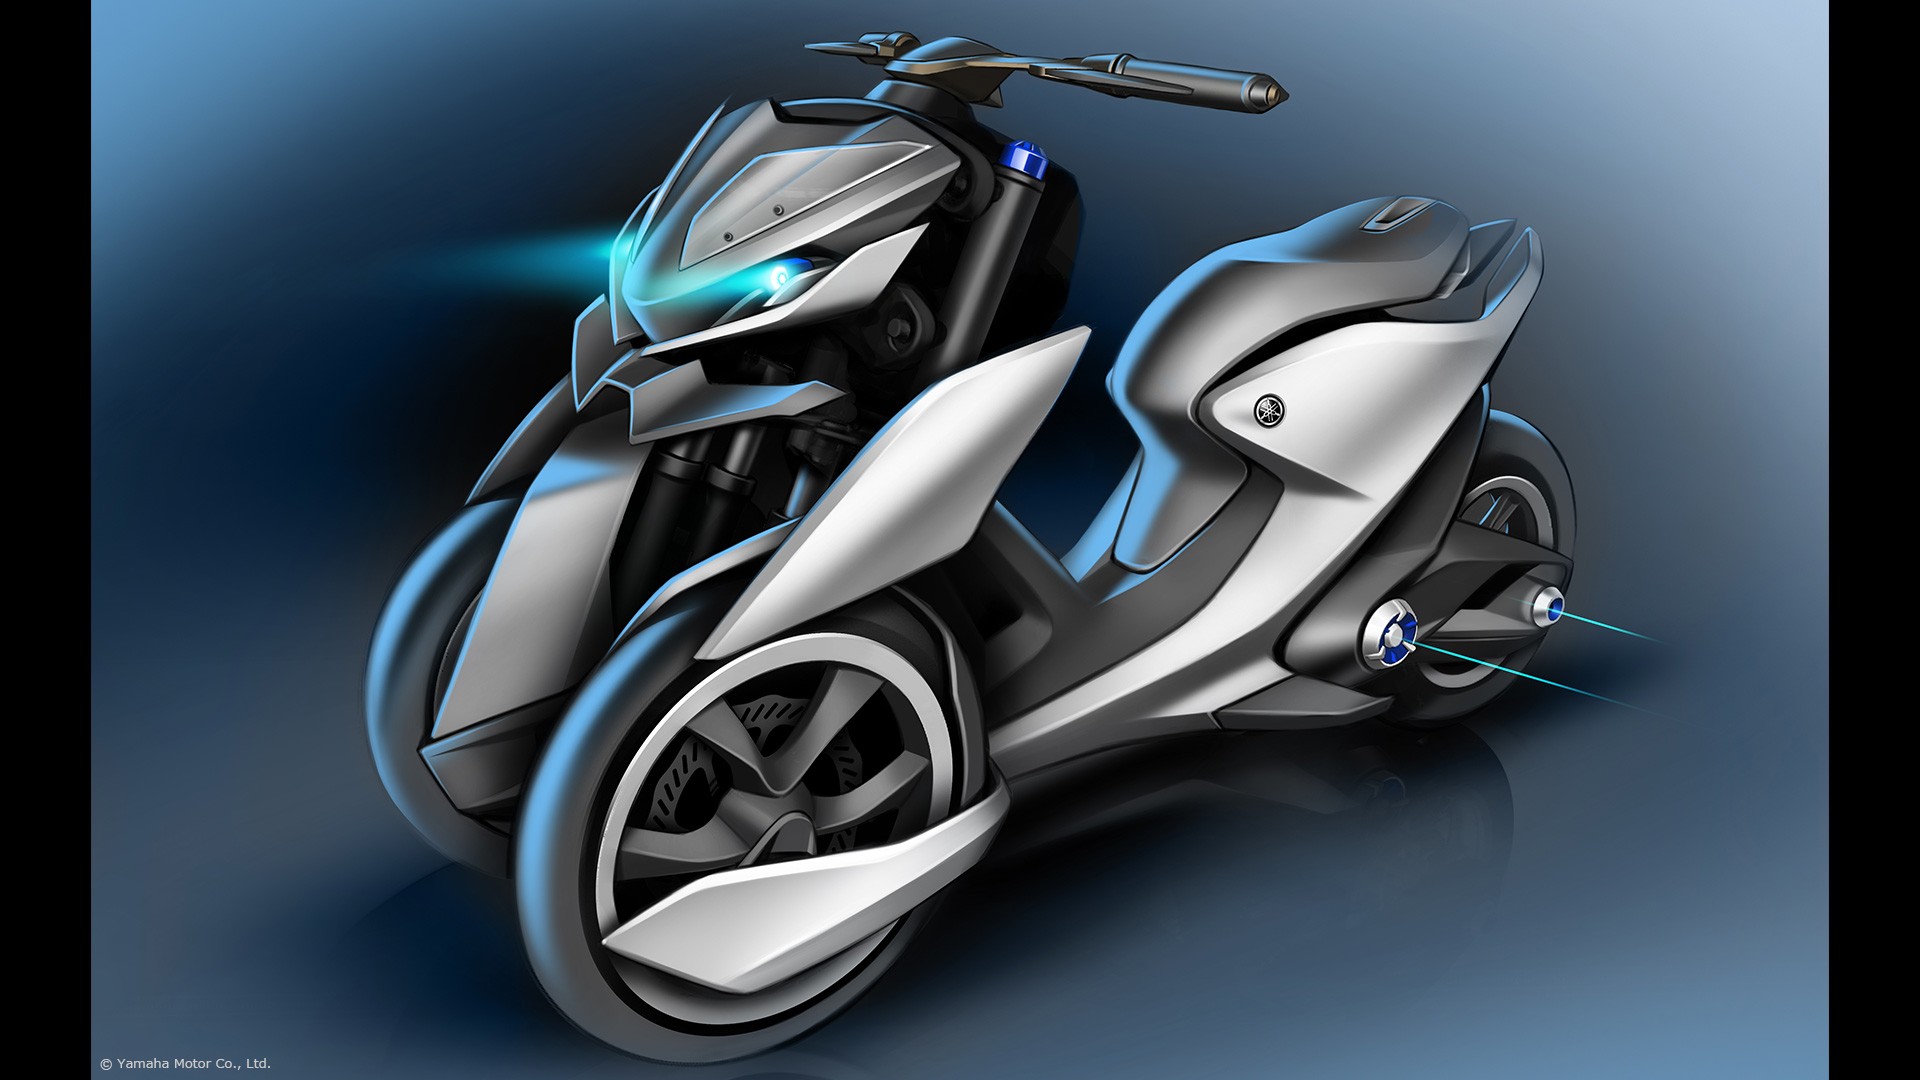 http://s1.cdn.autoevolution.com/images/news/gallery/yamaha-shows-03gen-three-wheeled-scooter-concepts-video-photo-gallery_8.jpg